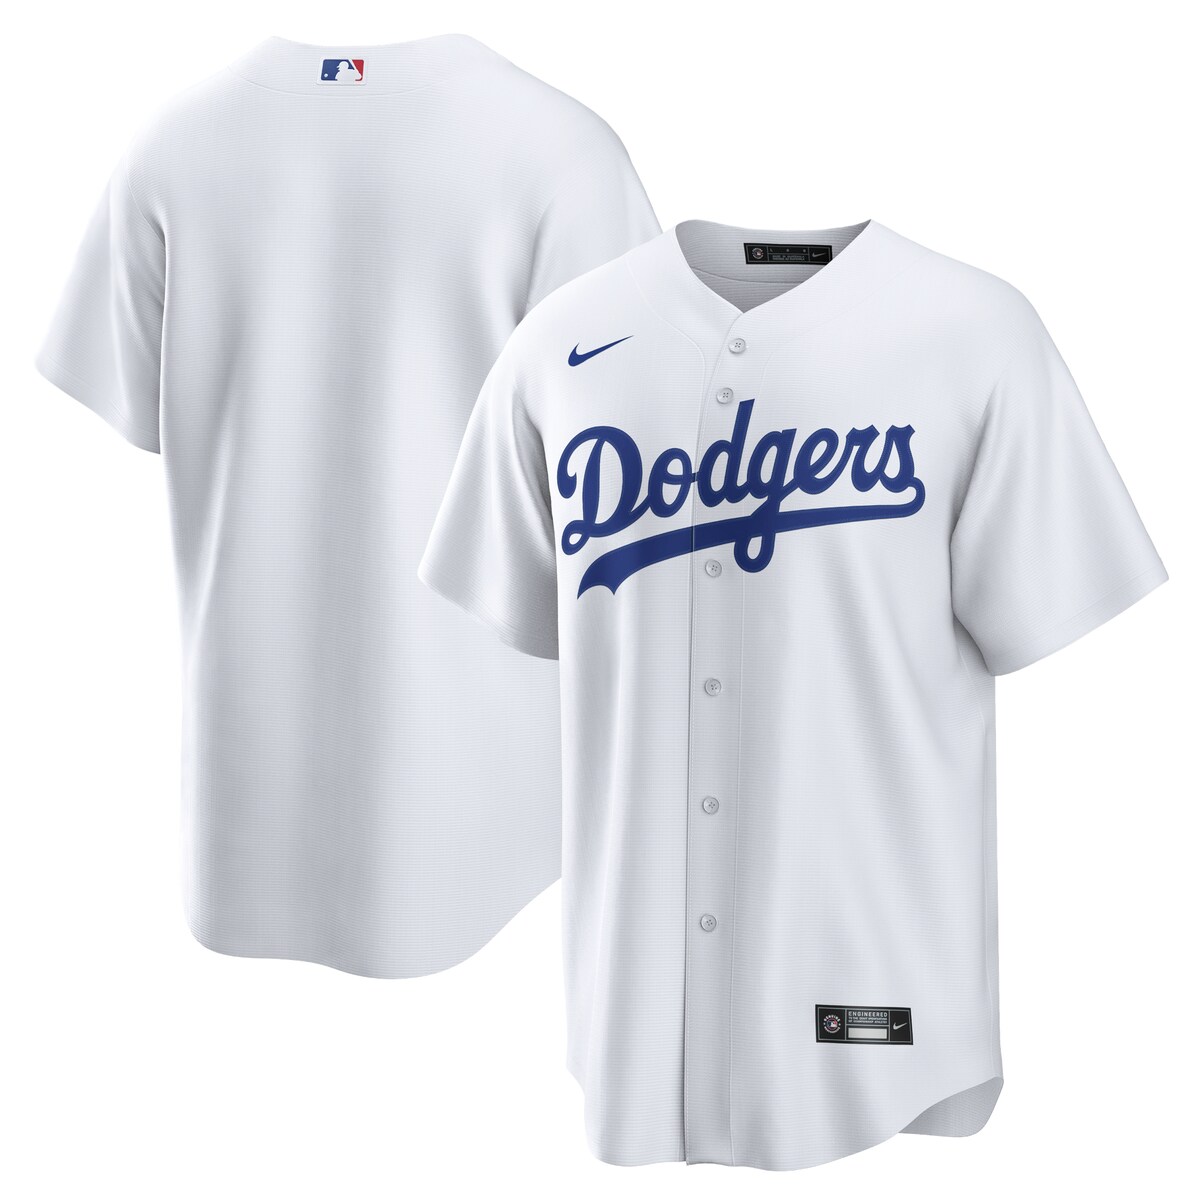 As the ultimate Los Angeles Dodgers fan, you deserve the same look that your favorite players sport out on the field. This Home Replica Team jersey from Nike brings the team's official design to your wardrobe for a consistently spirited look on game day. The polyester material and slick Los Angeles Dodgers graphics are just what any fan needs to look and feel their best.Rounded hemOfficially licensedJersey Color Style: HomeHeat-sealed jock tagImportedMachine wash gentle or dry clean. Tumble dry low, hang dry preferred.Brand: NikeMaterial: 100% PolyesterShort sleeveFull-button frontHeat-sealed transfer appliqueMLB Batterman applique on center back neckReplica Jersey